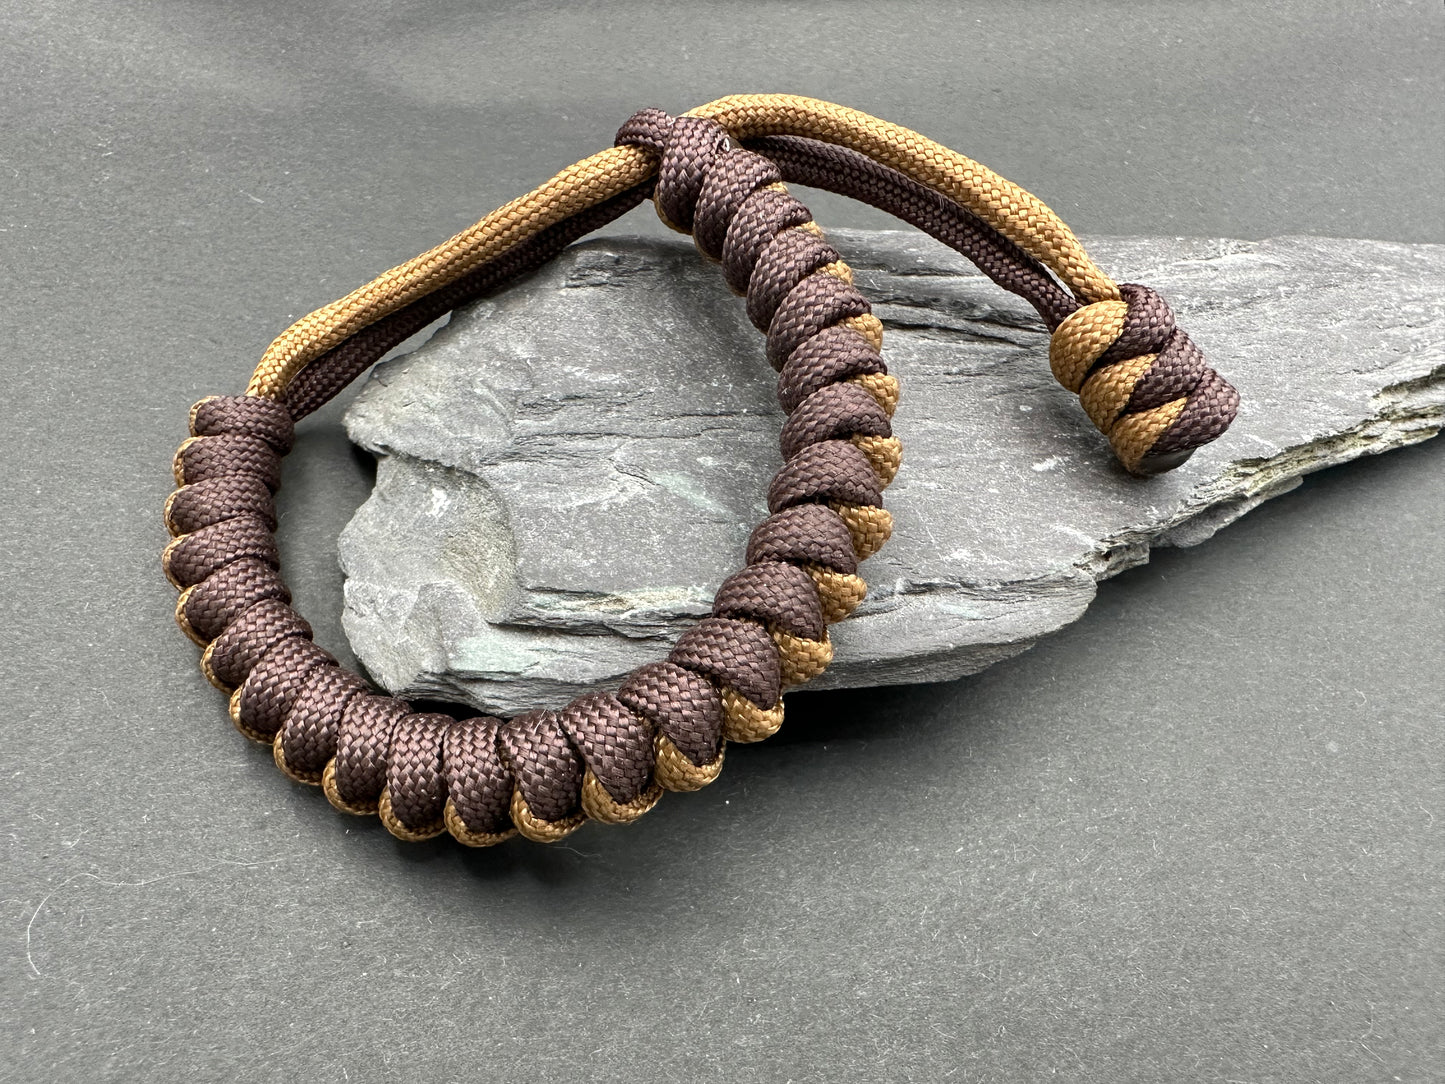 Paracord survival bracelets chocolate brownie and Kaki brown colour, the item is lightweight comfortable and handmade in a snake knott tactical design U.K.